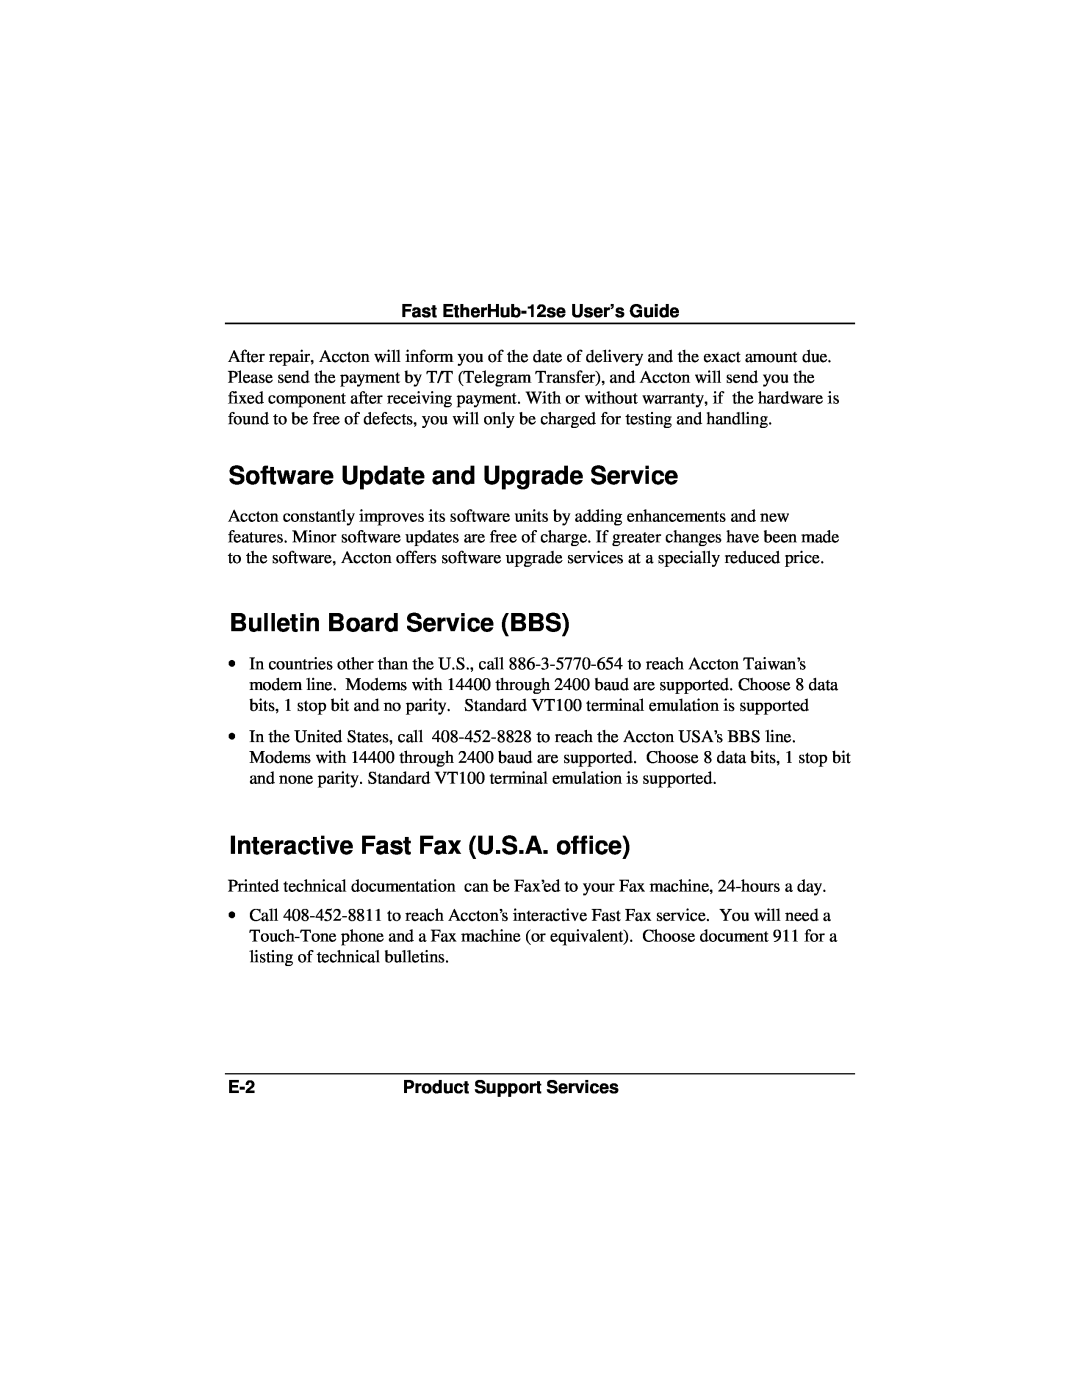 Accton Technology 12se Software Update and Upgrade Service, Bulletin Board Service BBS, Interactive Fast Fax U.S.A. office 